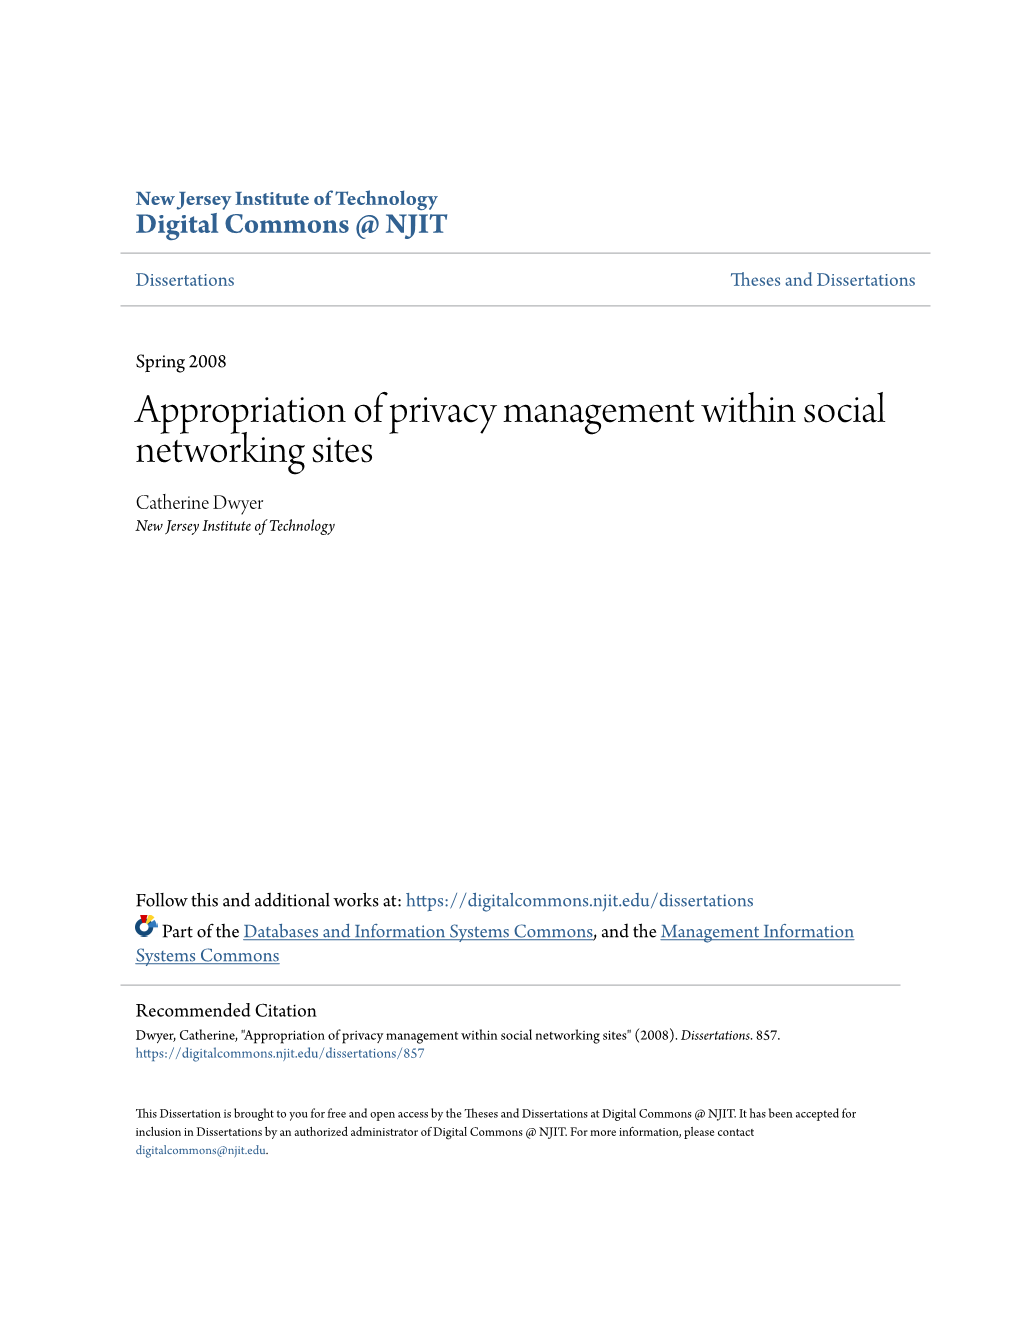 Appropriation of Privacy Management Within Social Networking Sites Catherine Dwyer New Jersey Institute of Technology